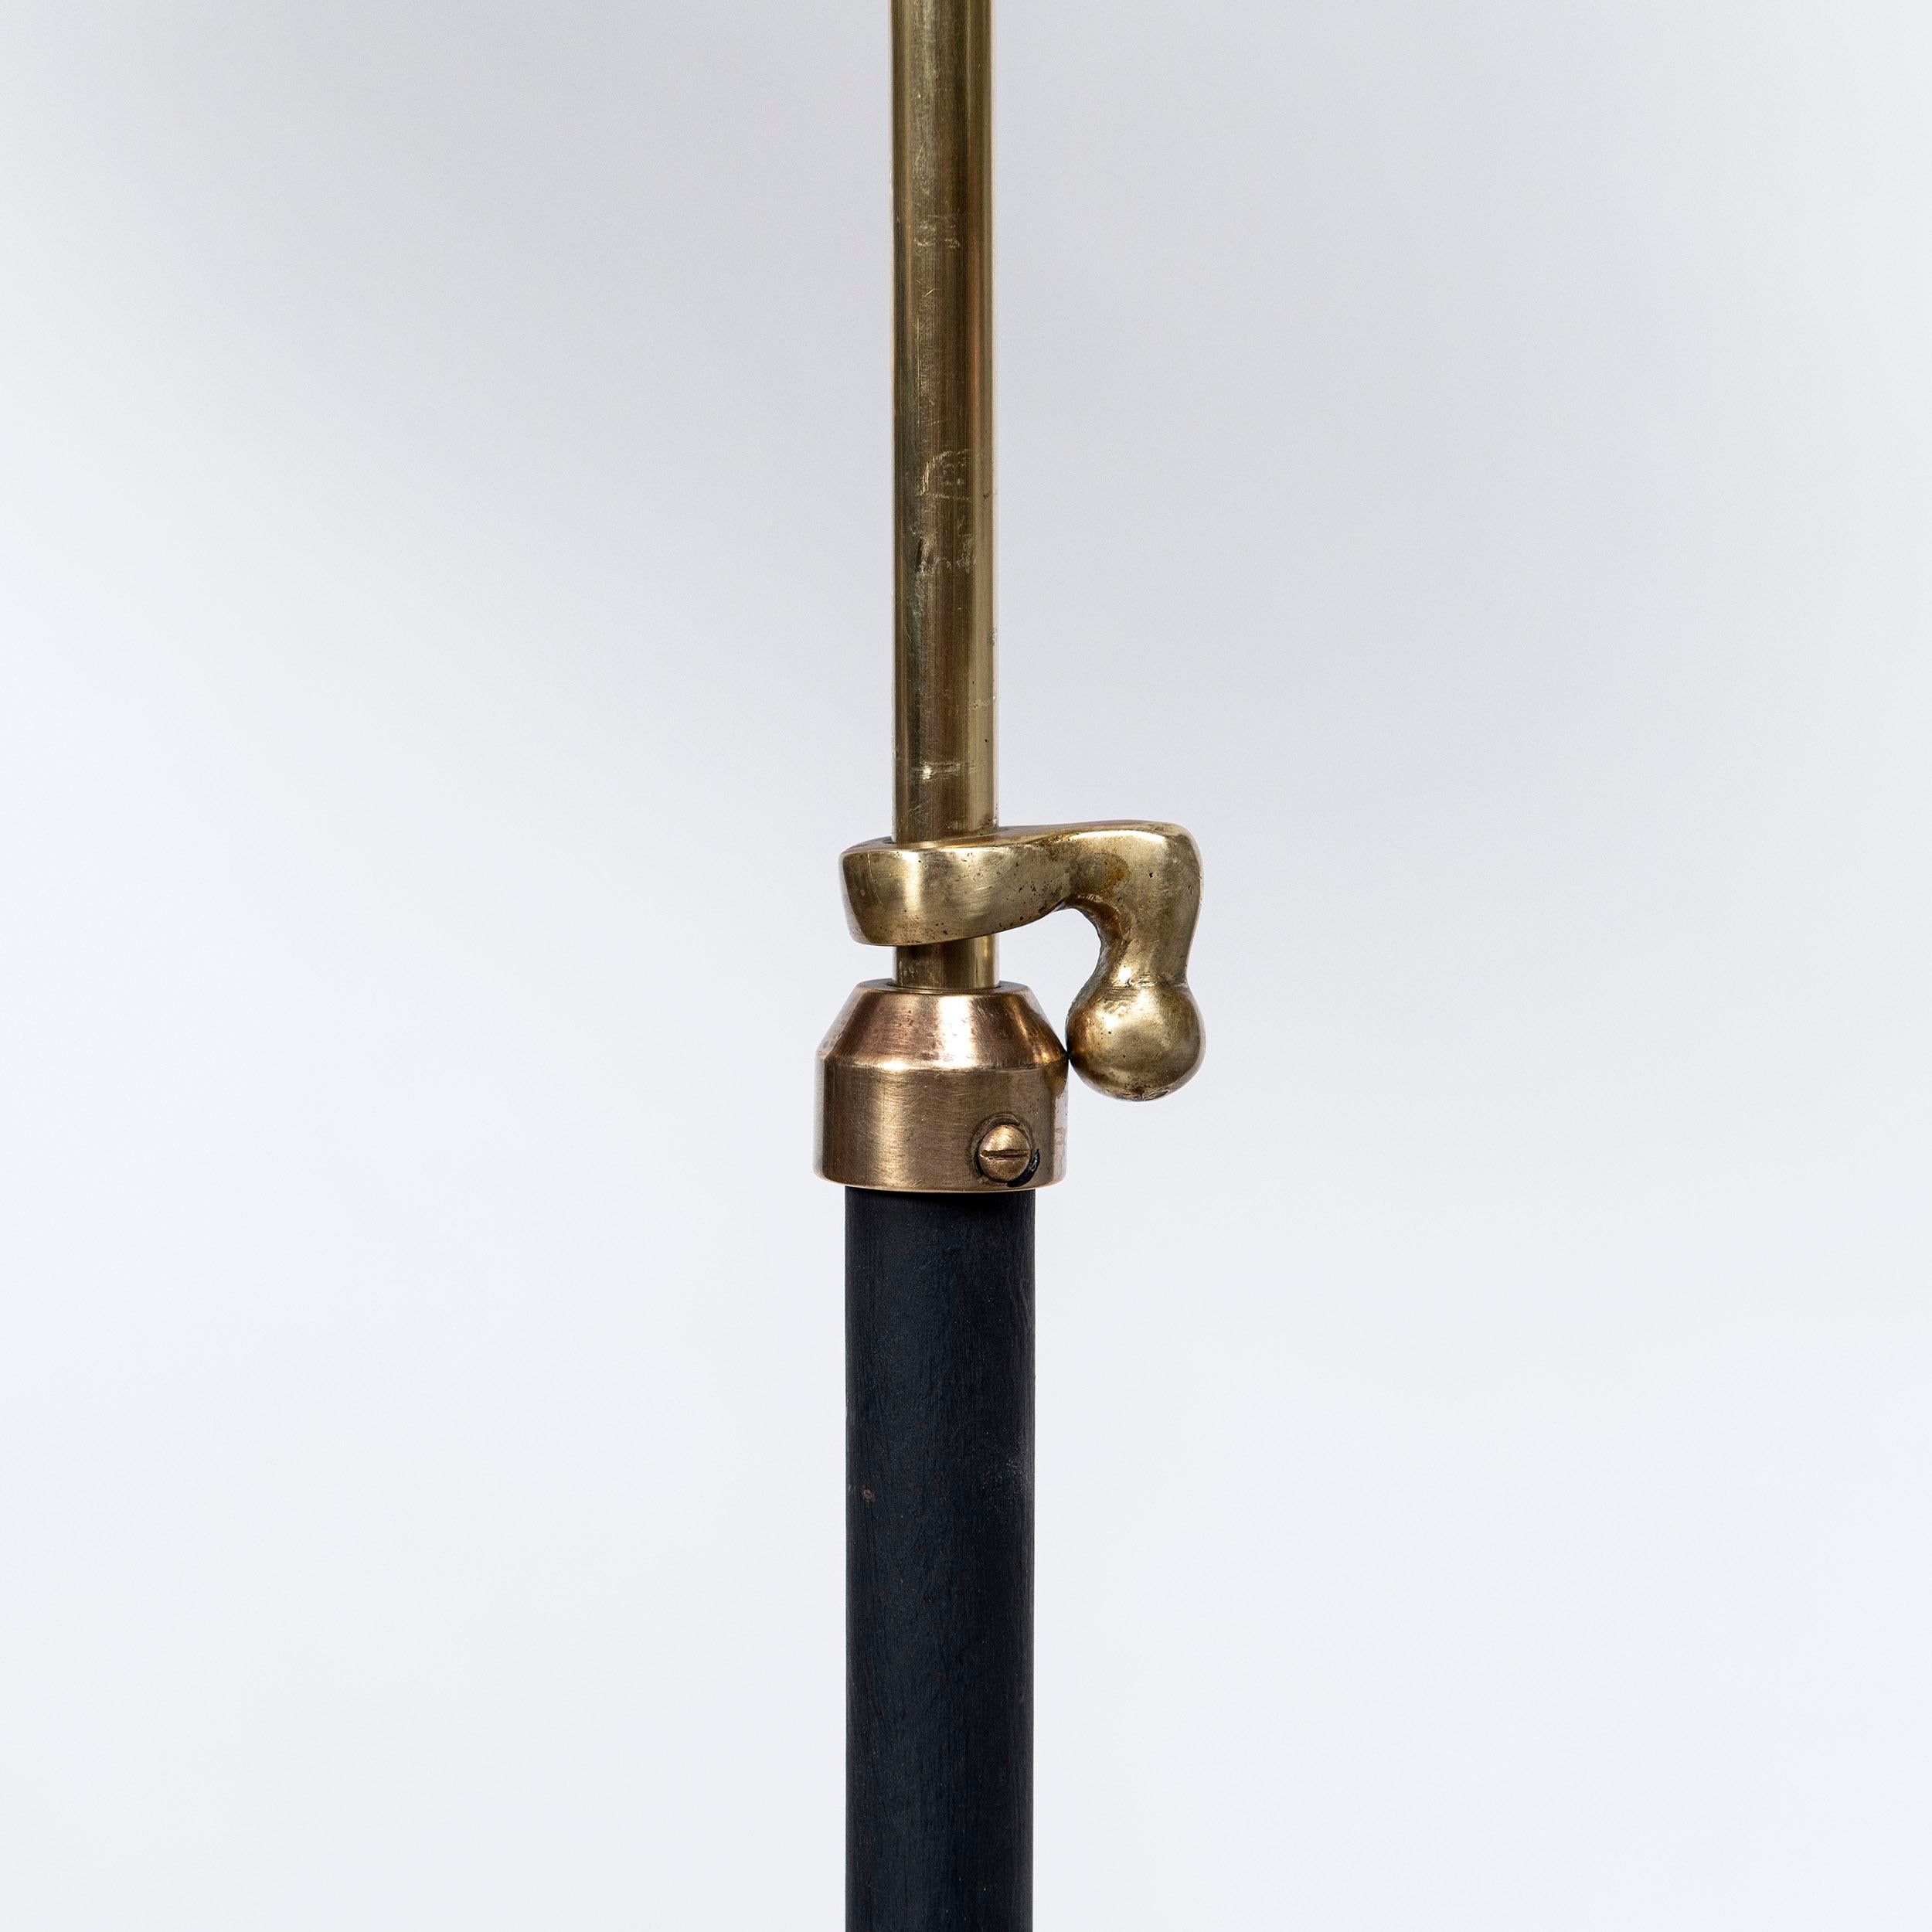 Argentine Pair of Iron and Bronze Floor Lamps, by Comte, Argentina, Buenos Aires, c. 1940 For Sale